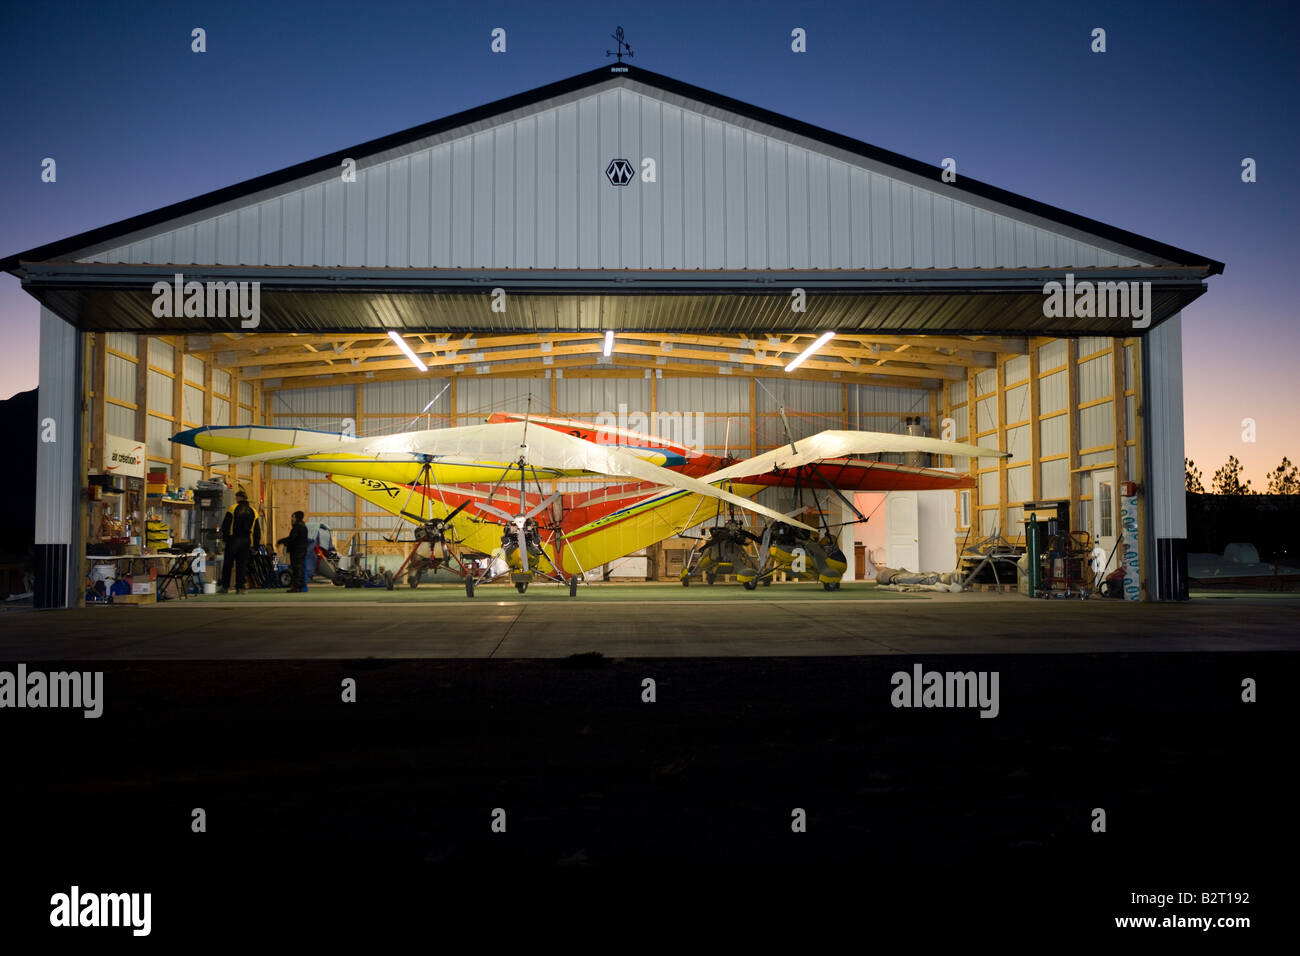 Microlite aircraft in a large hangar at the Sky Gypsy Complex Rodeo New Mexico Stock Photo